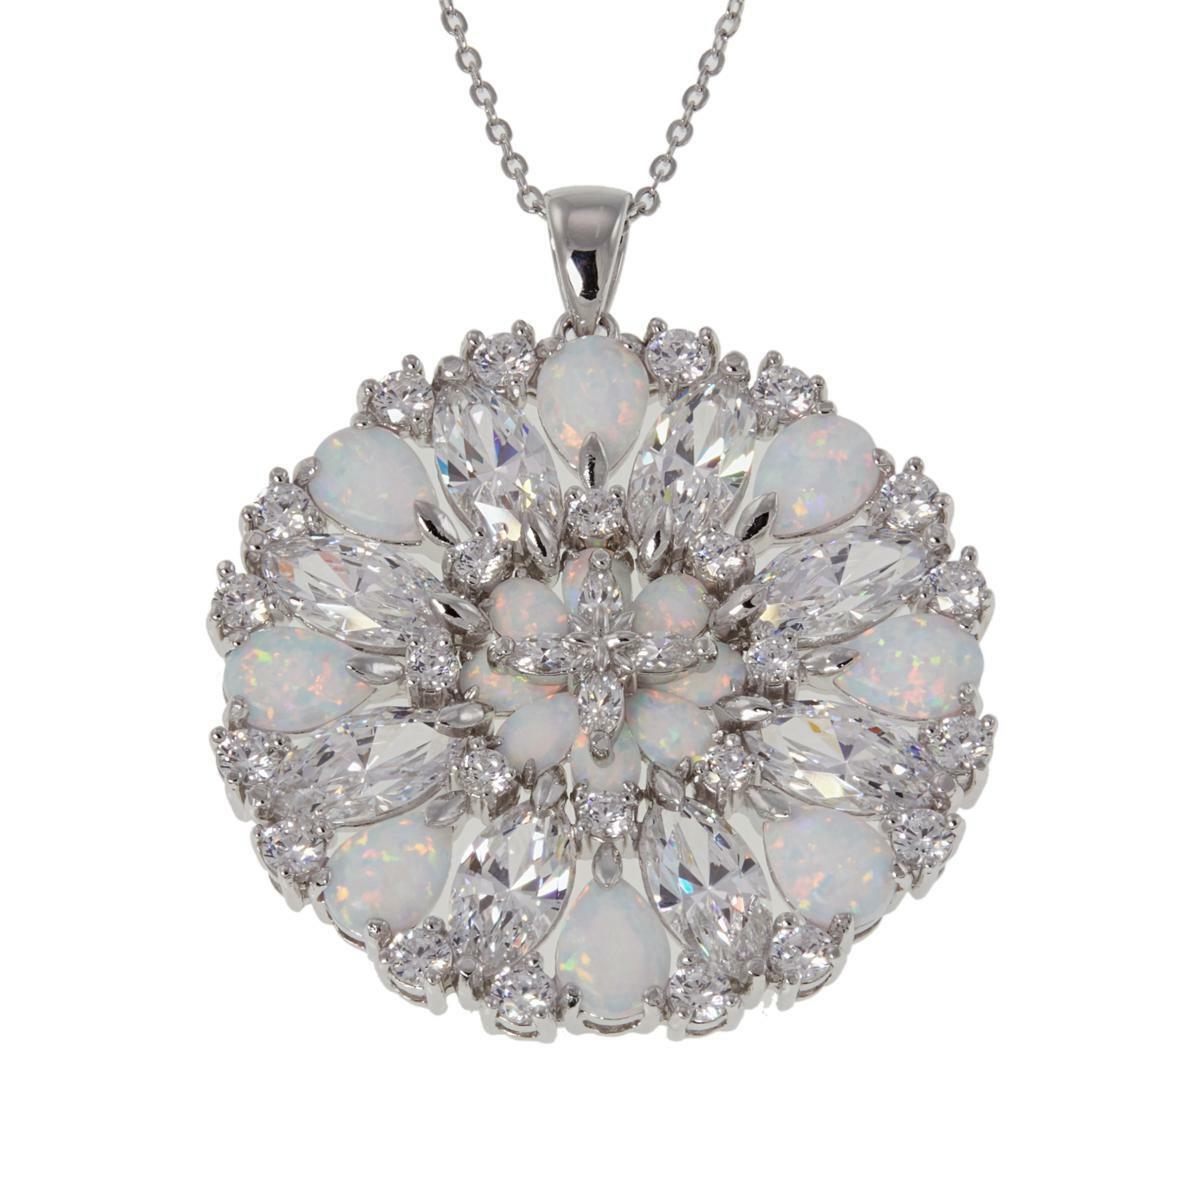 Absolute Sterling Opal & Cubic Zirconia Round Cluster Pendant Necklace HSN $190.